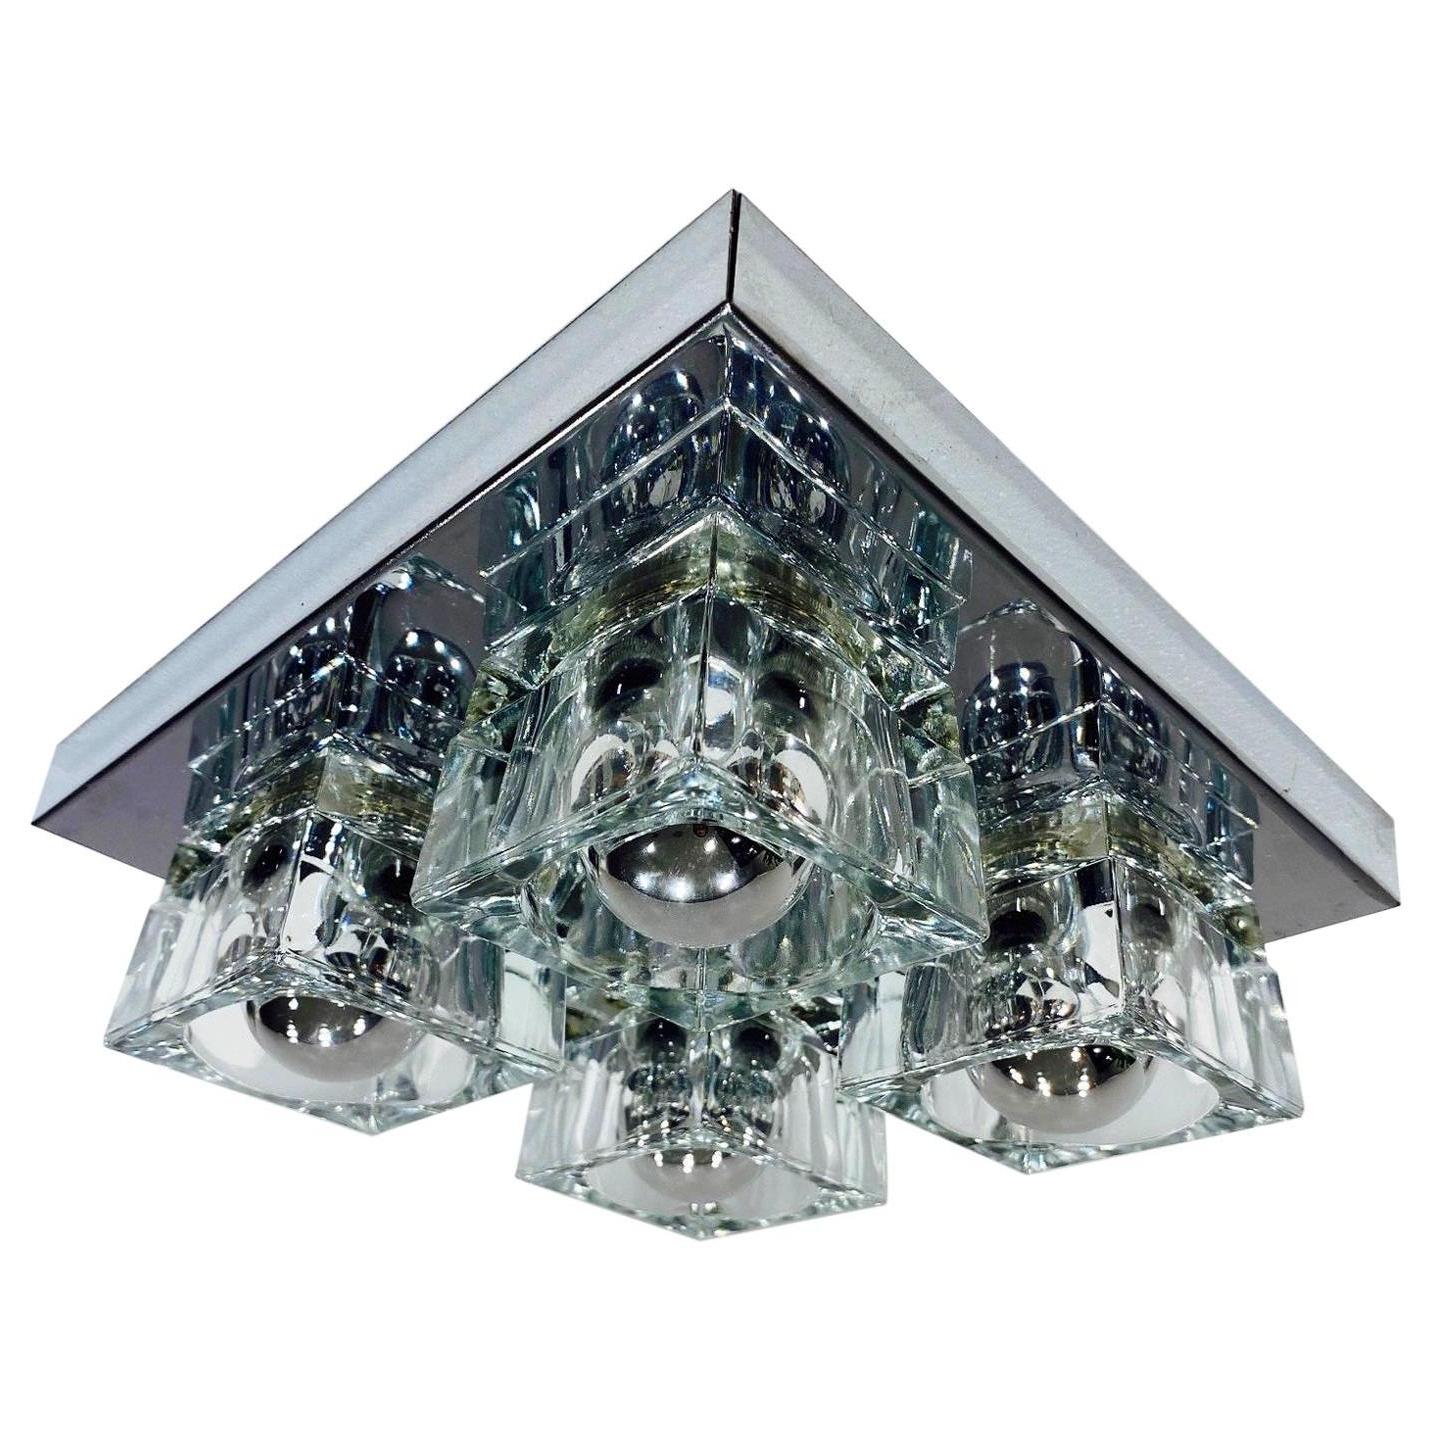 1970's vintage flush mount ceiling light with Cubist Design. The fixture has a square form comprised of a polished chrome frame fitted with four thick beveled glass block shades. Excellent scale for hallways, powder rooms or entryway. Can also be